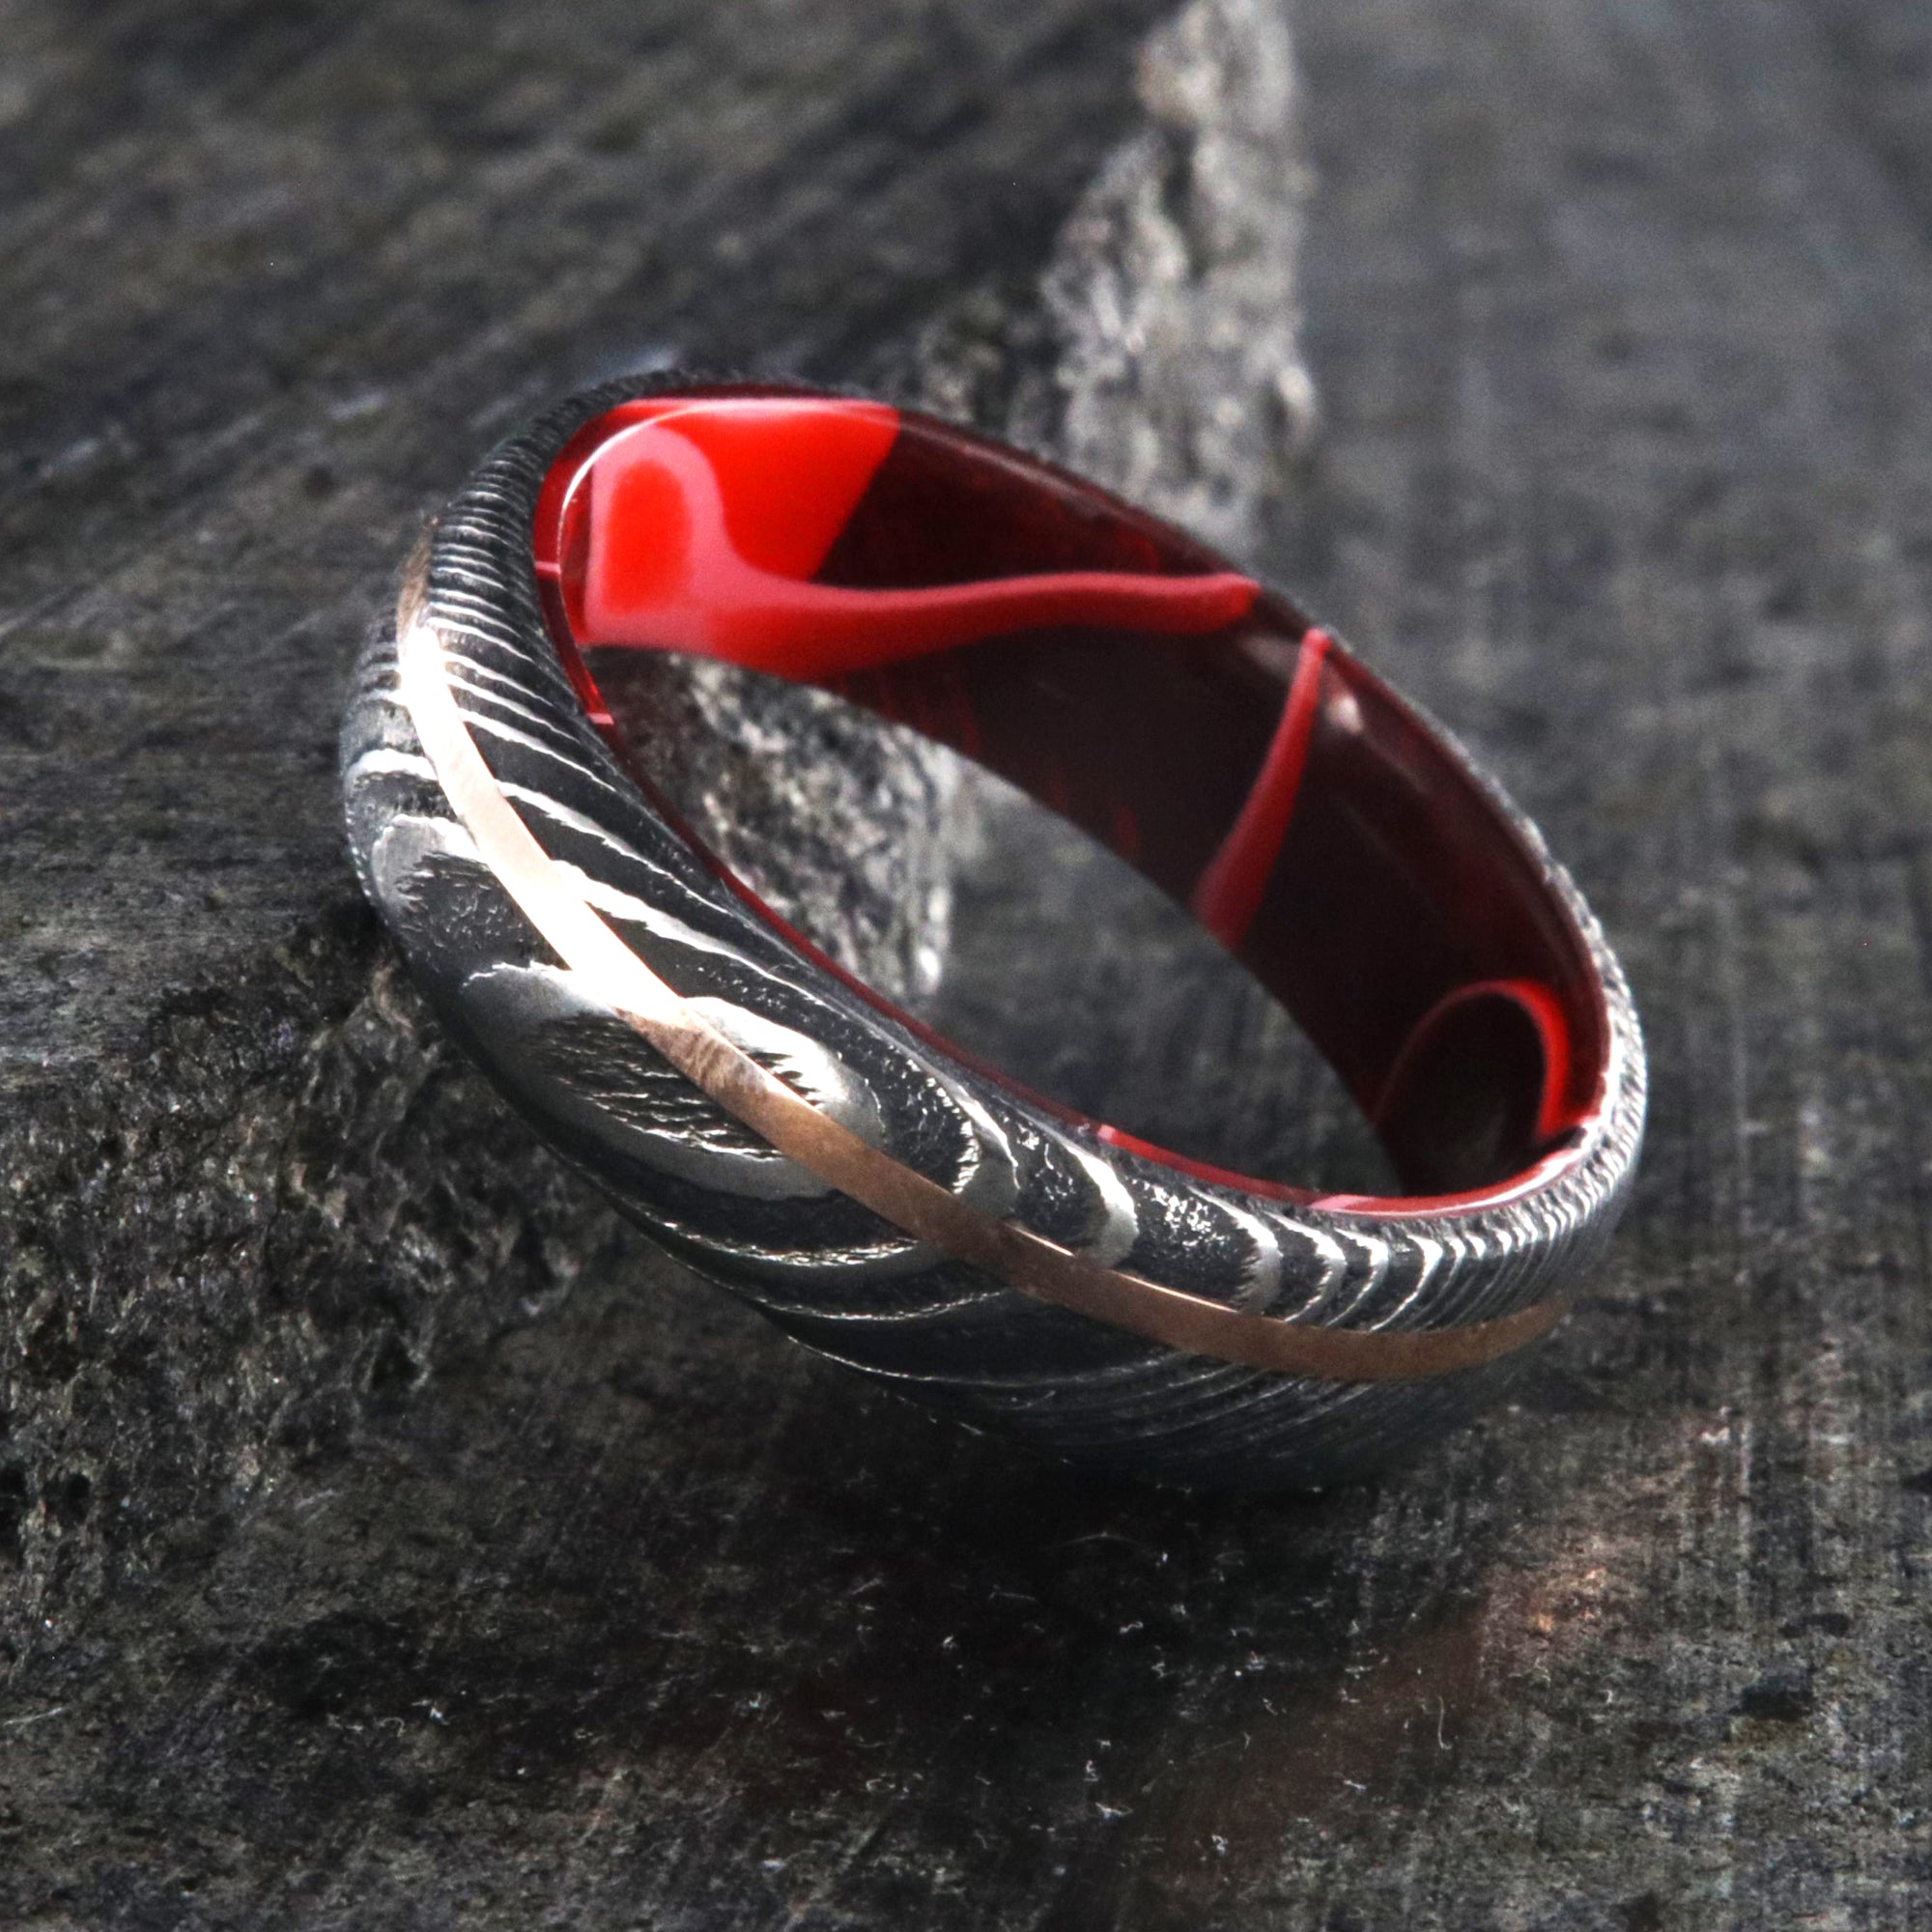 6mm wide black Damascus steel ring with a thin off-centered rose gold inlay and dark and bright red swirled acrylic sleeve